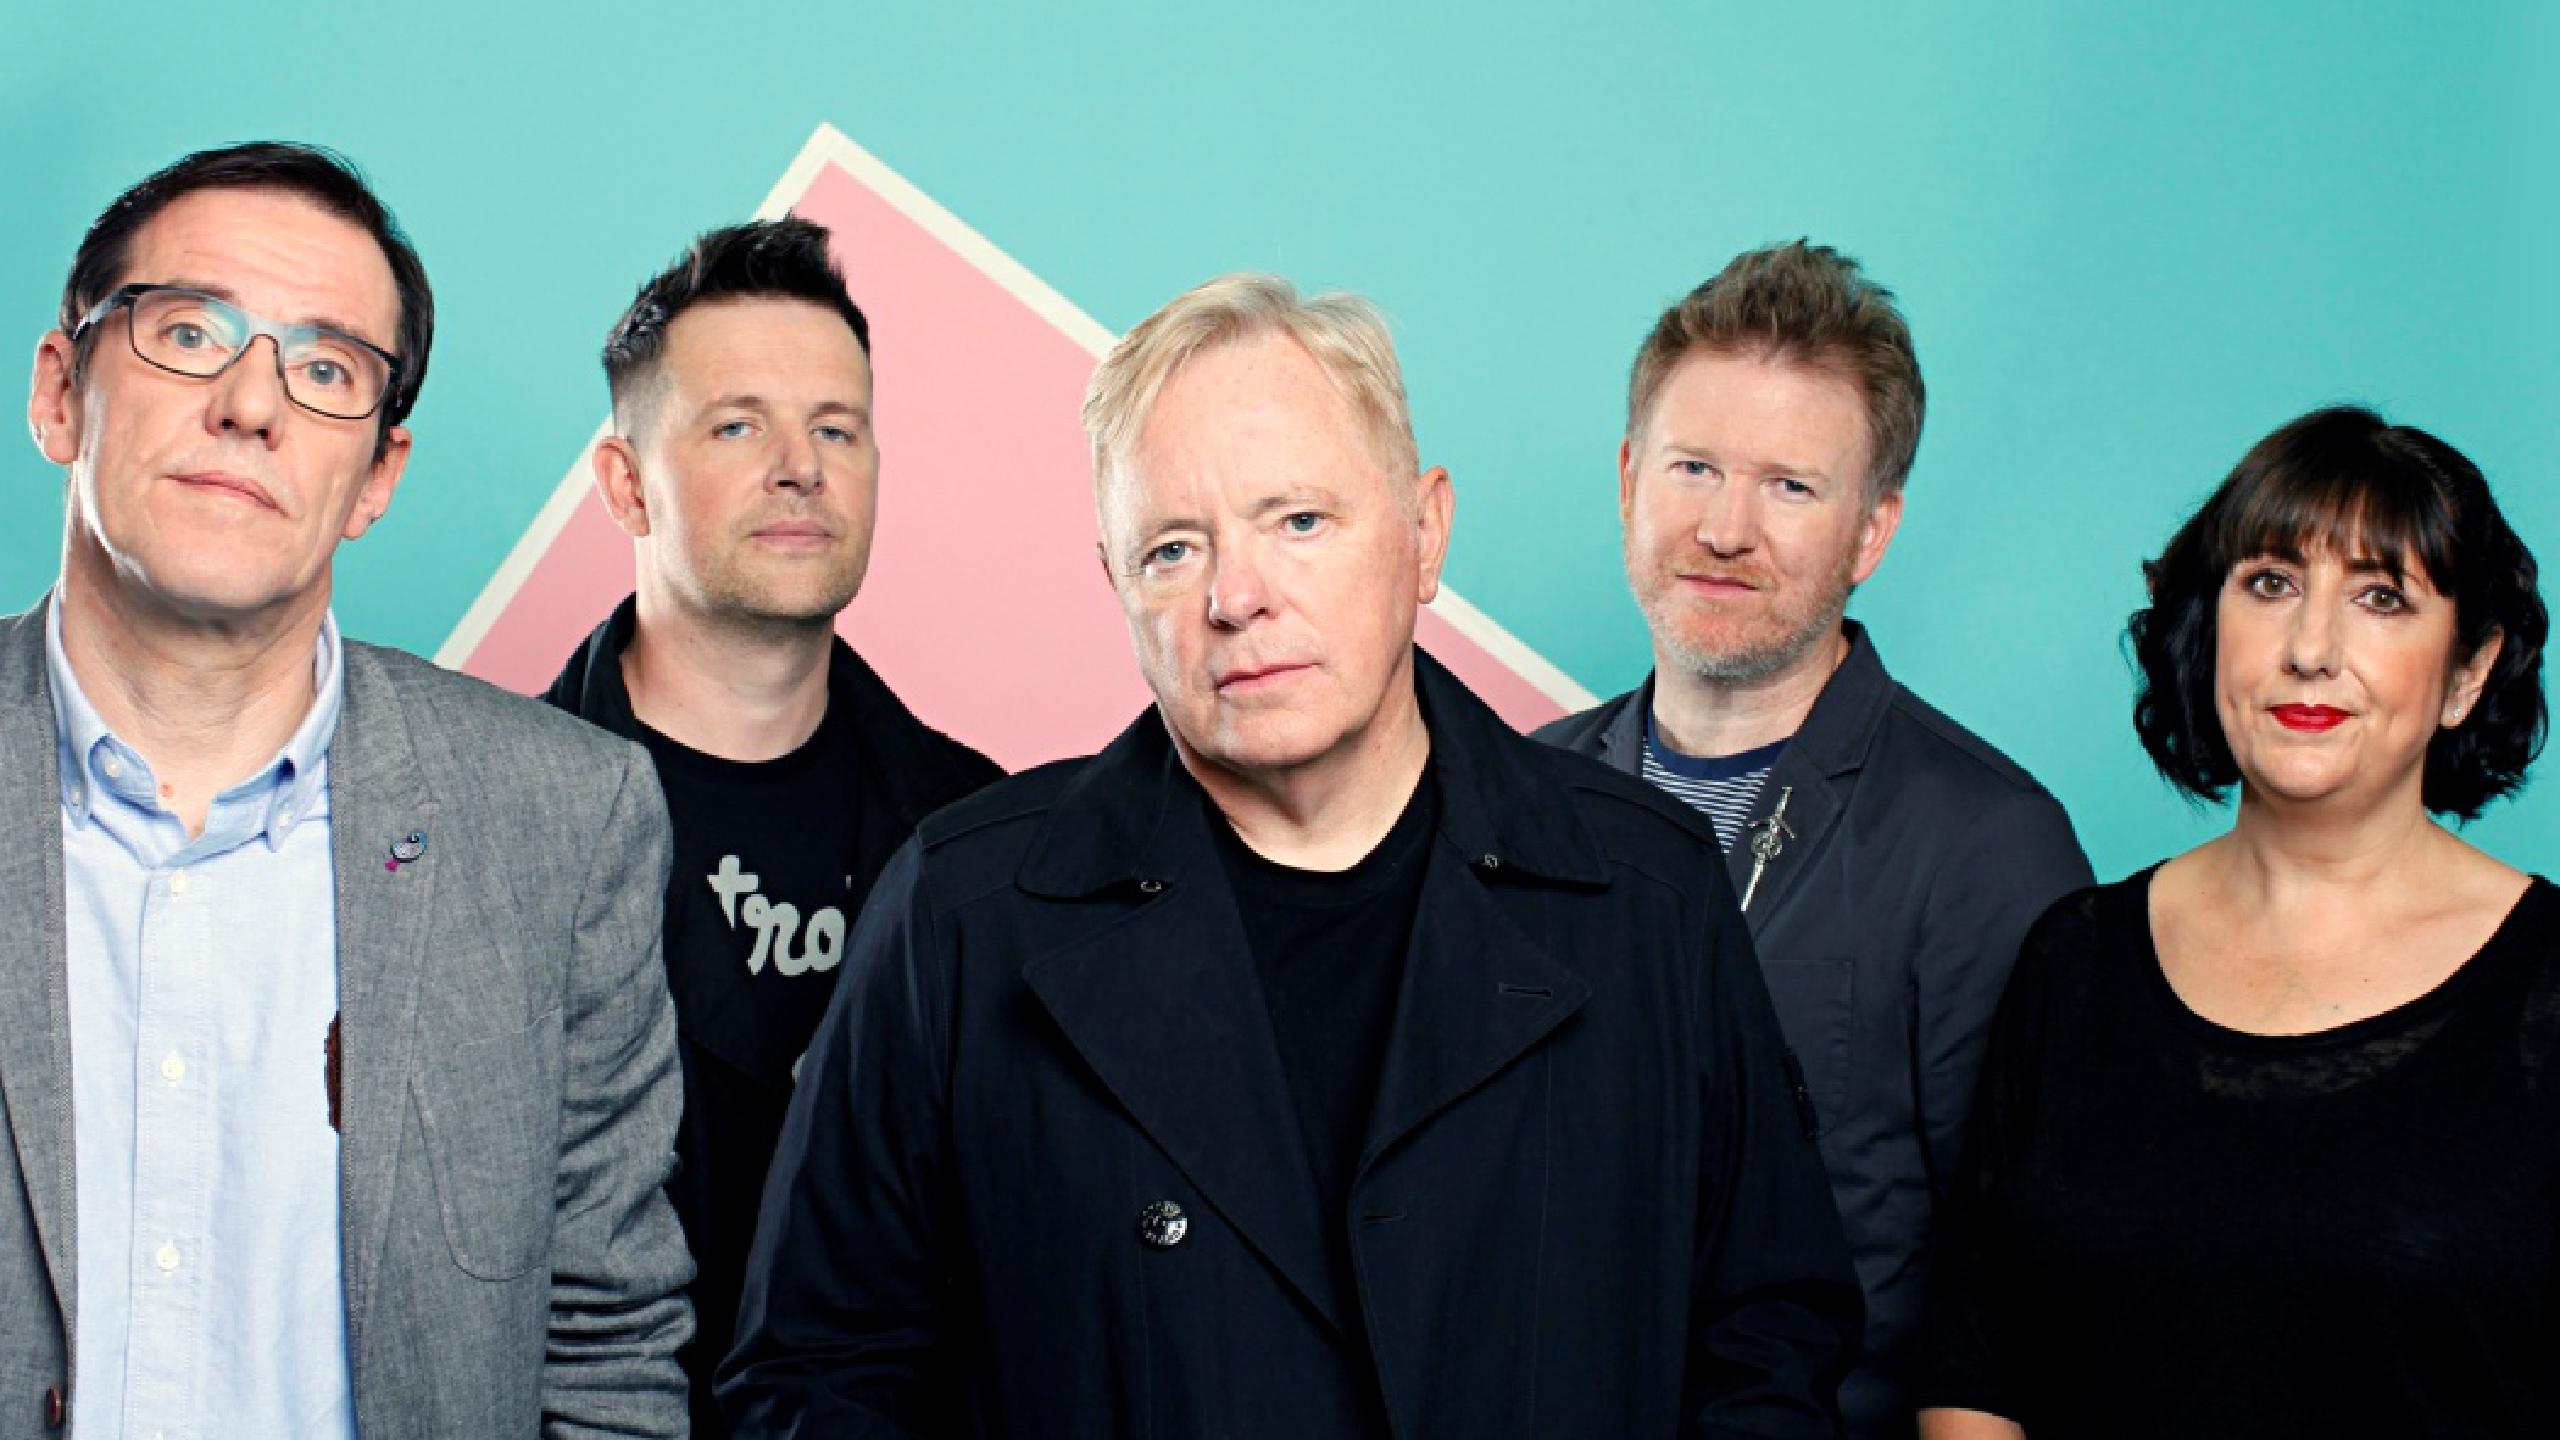 We have new order. New order. New order Band. Группа New order 1980s. New order 2007.